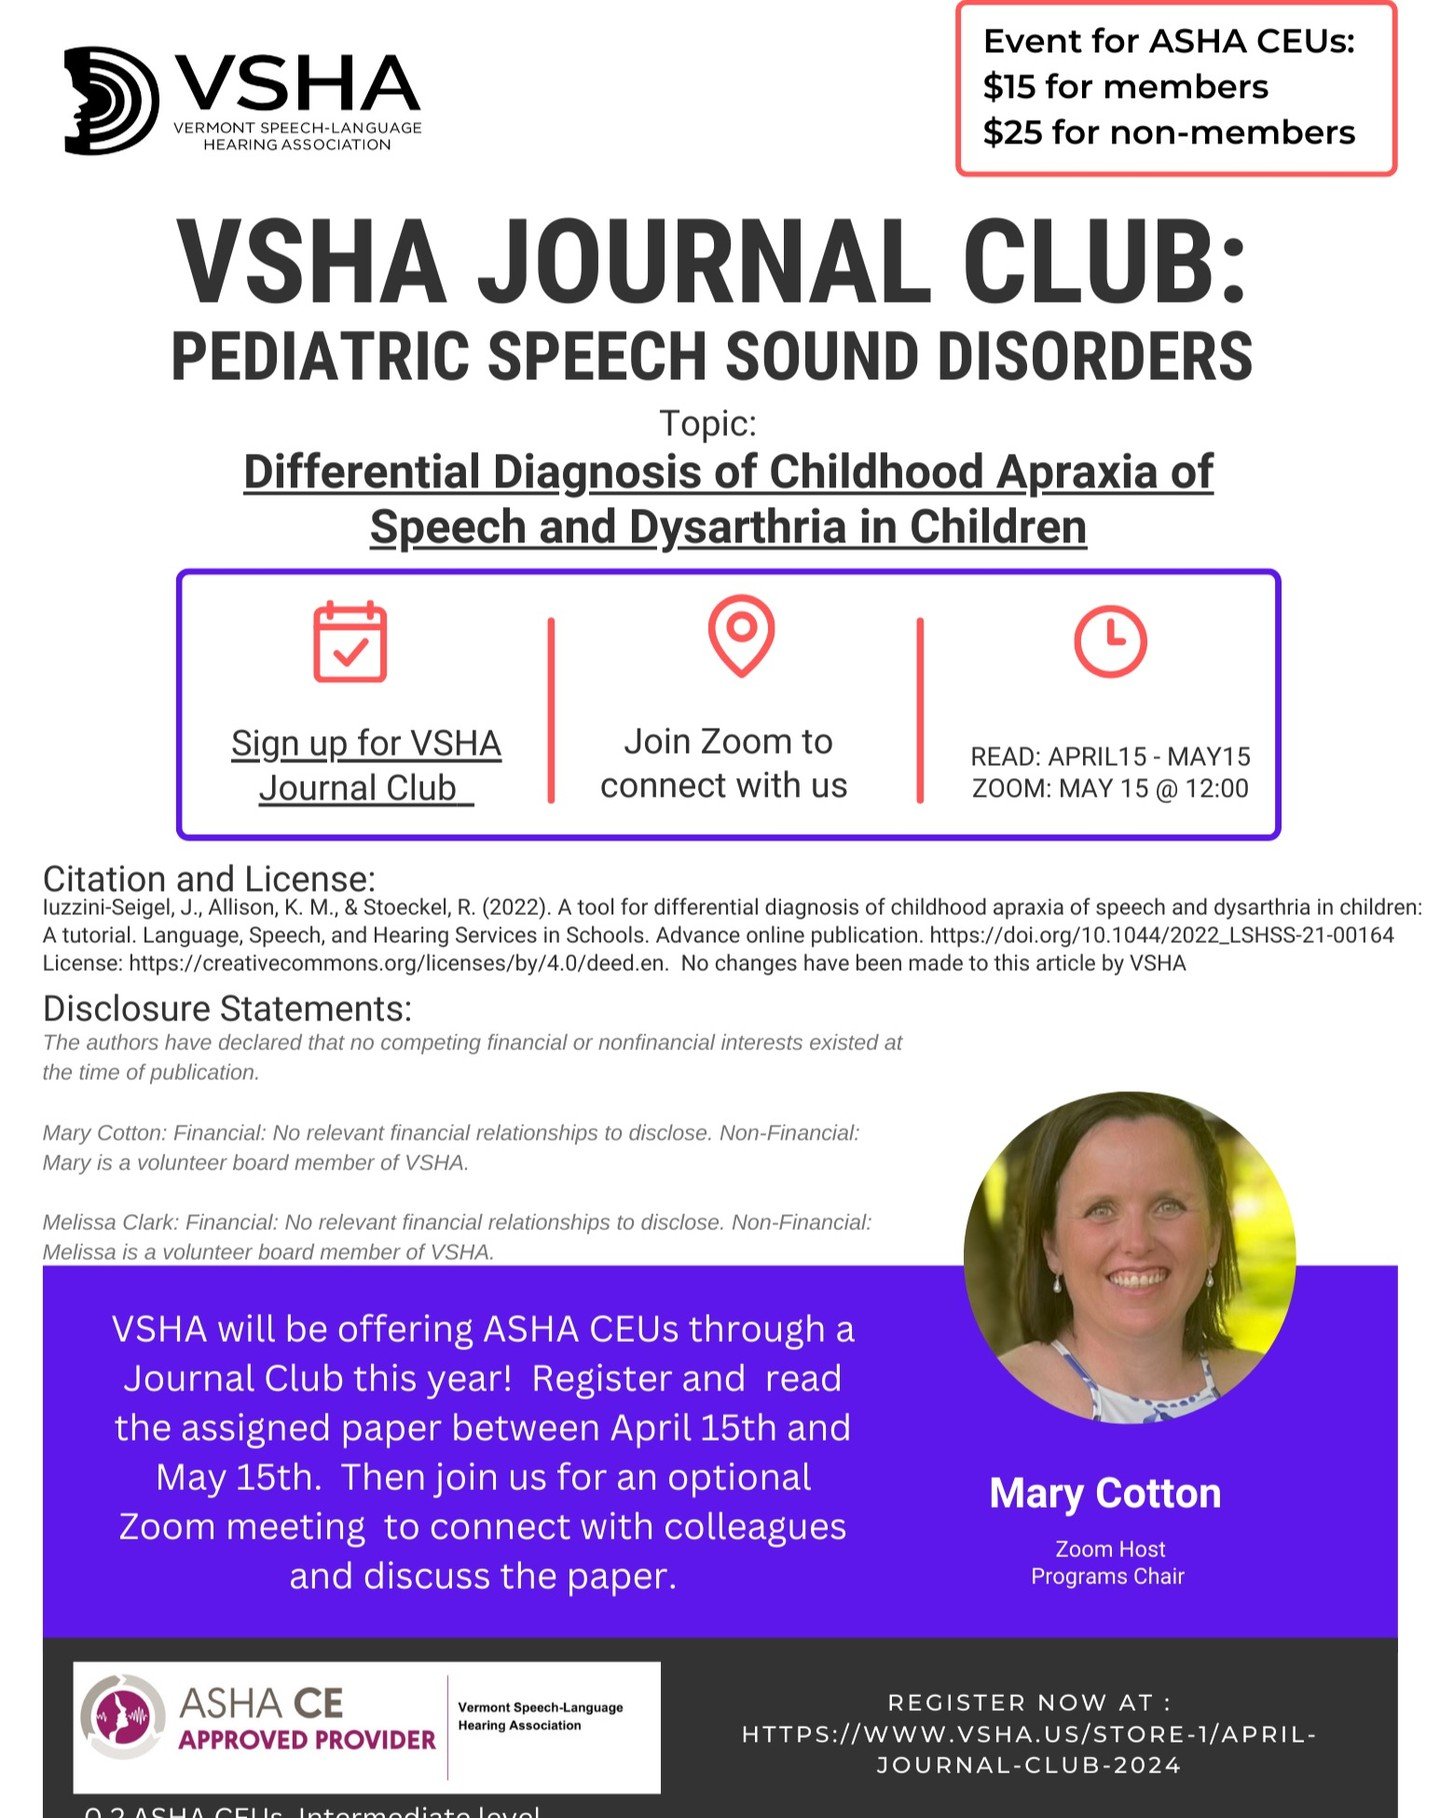 VSHA is hosting our first continuing education event of the year! Sign up for our pediatric speech sound disorders journal club to learn about a new assessment tool. Go to VSHA.us to sign up. The event page link is also in our bio! Please share! #vts